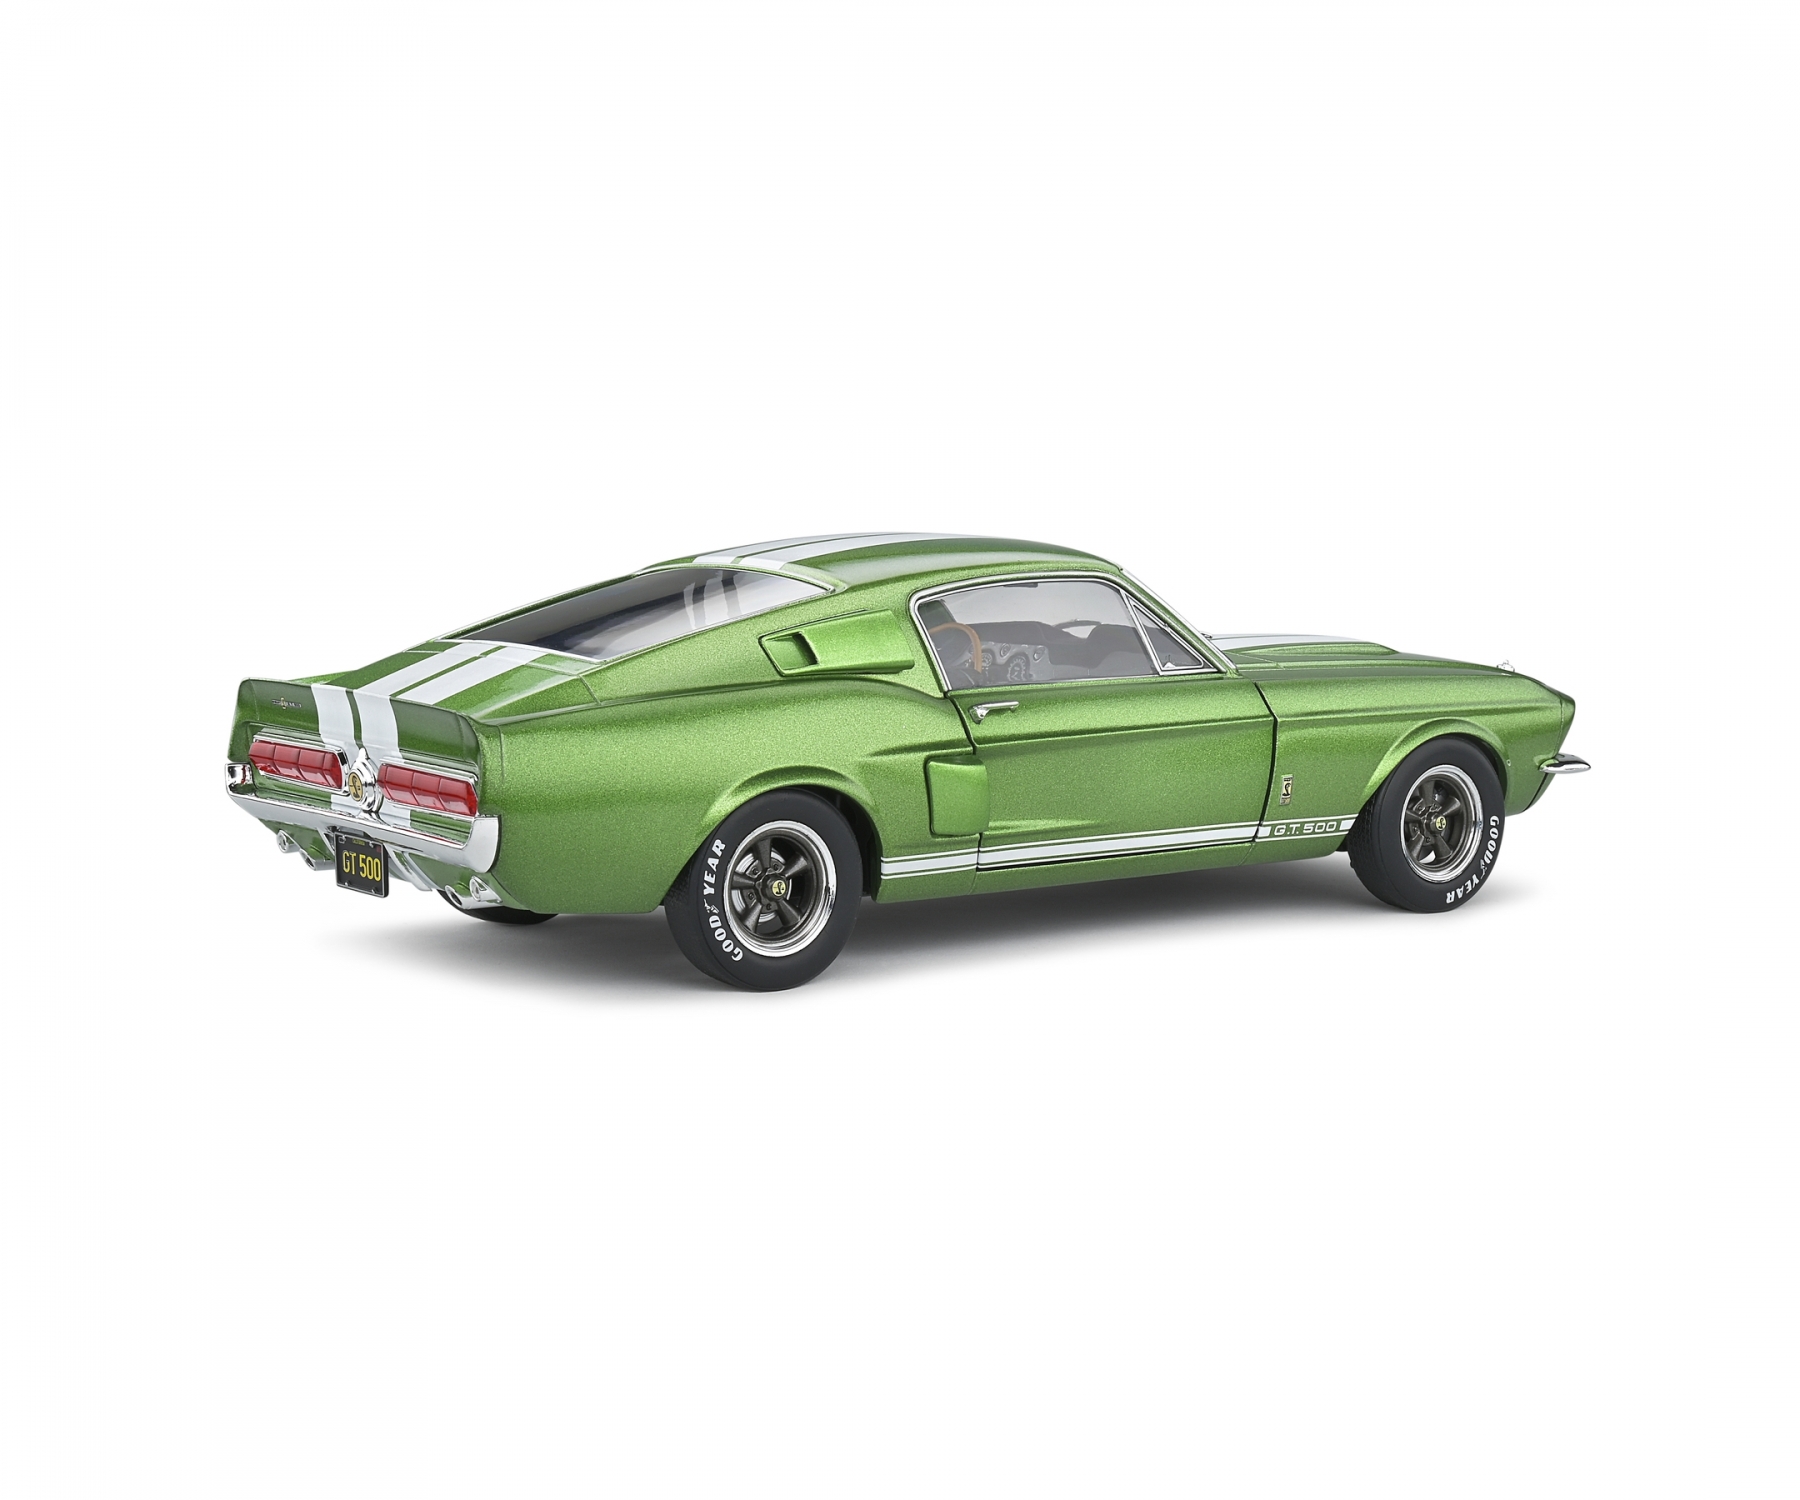 solido-S1802907-3-Shelby-Ford-Mustang-GT500-lime-green-white-stripes-1967-Ponycar